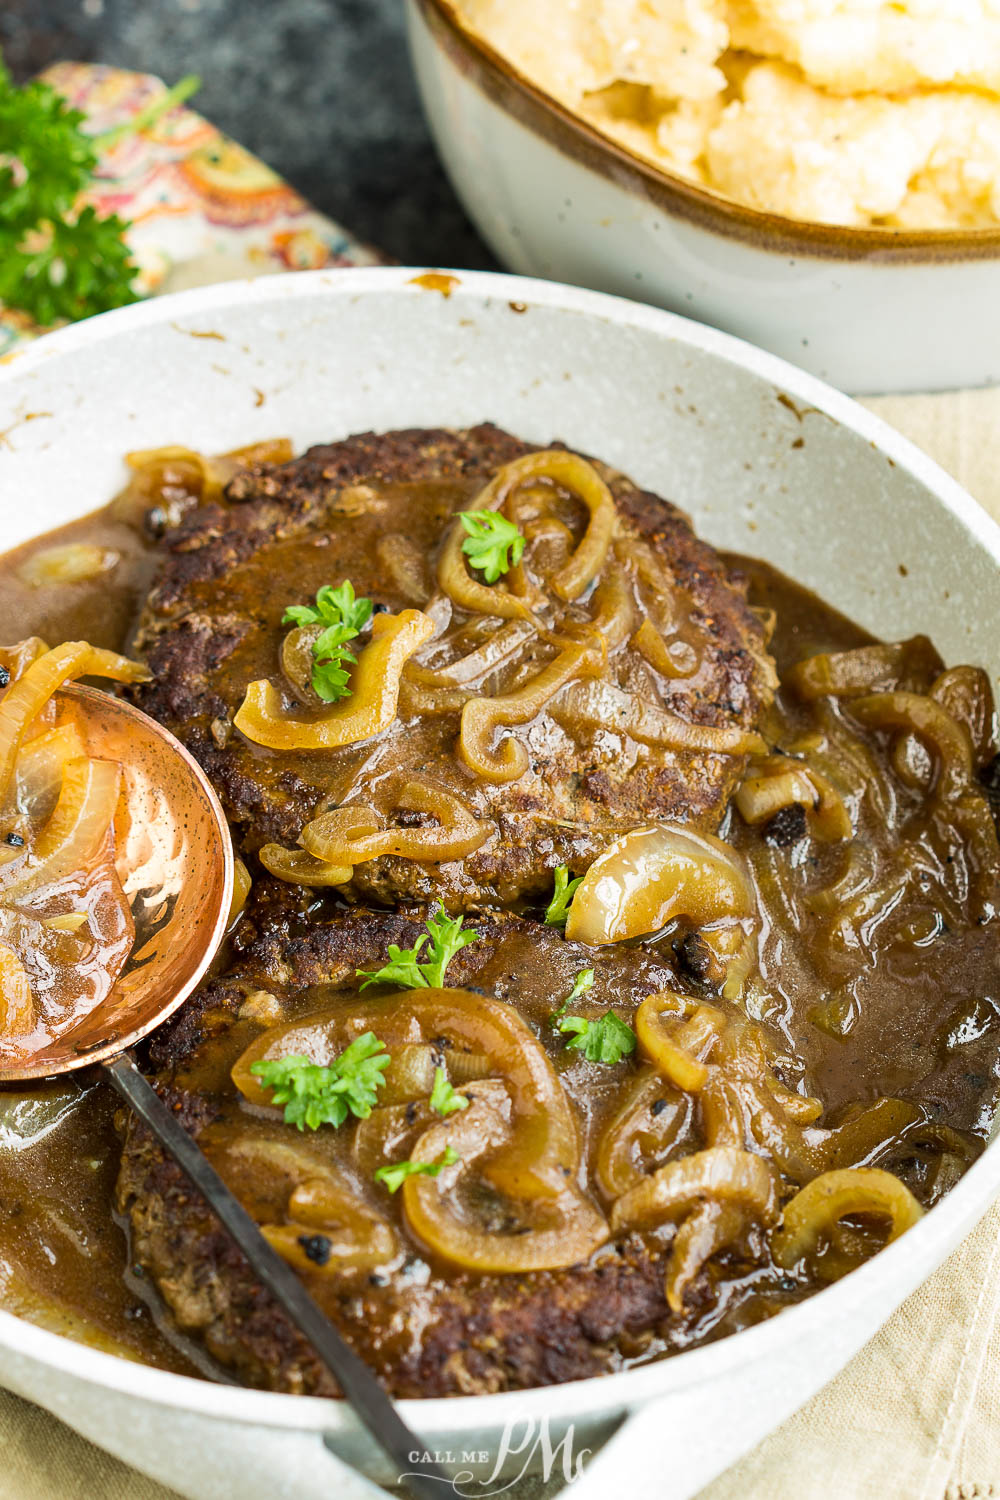 Steak with Onions and Brown Gravy